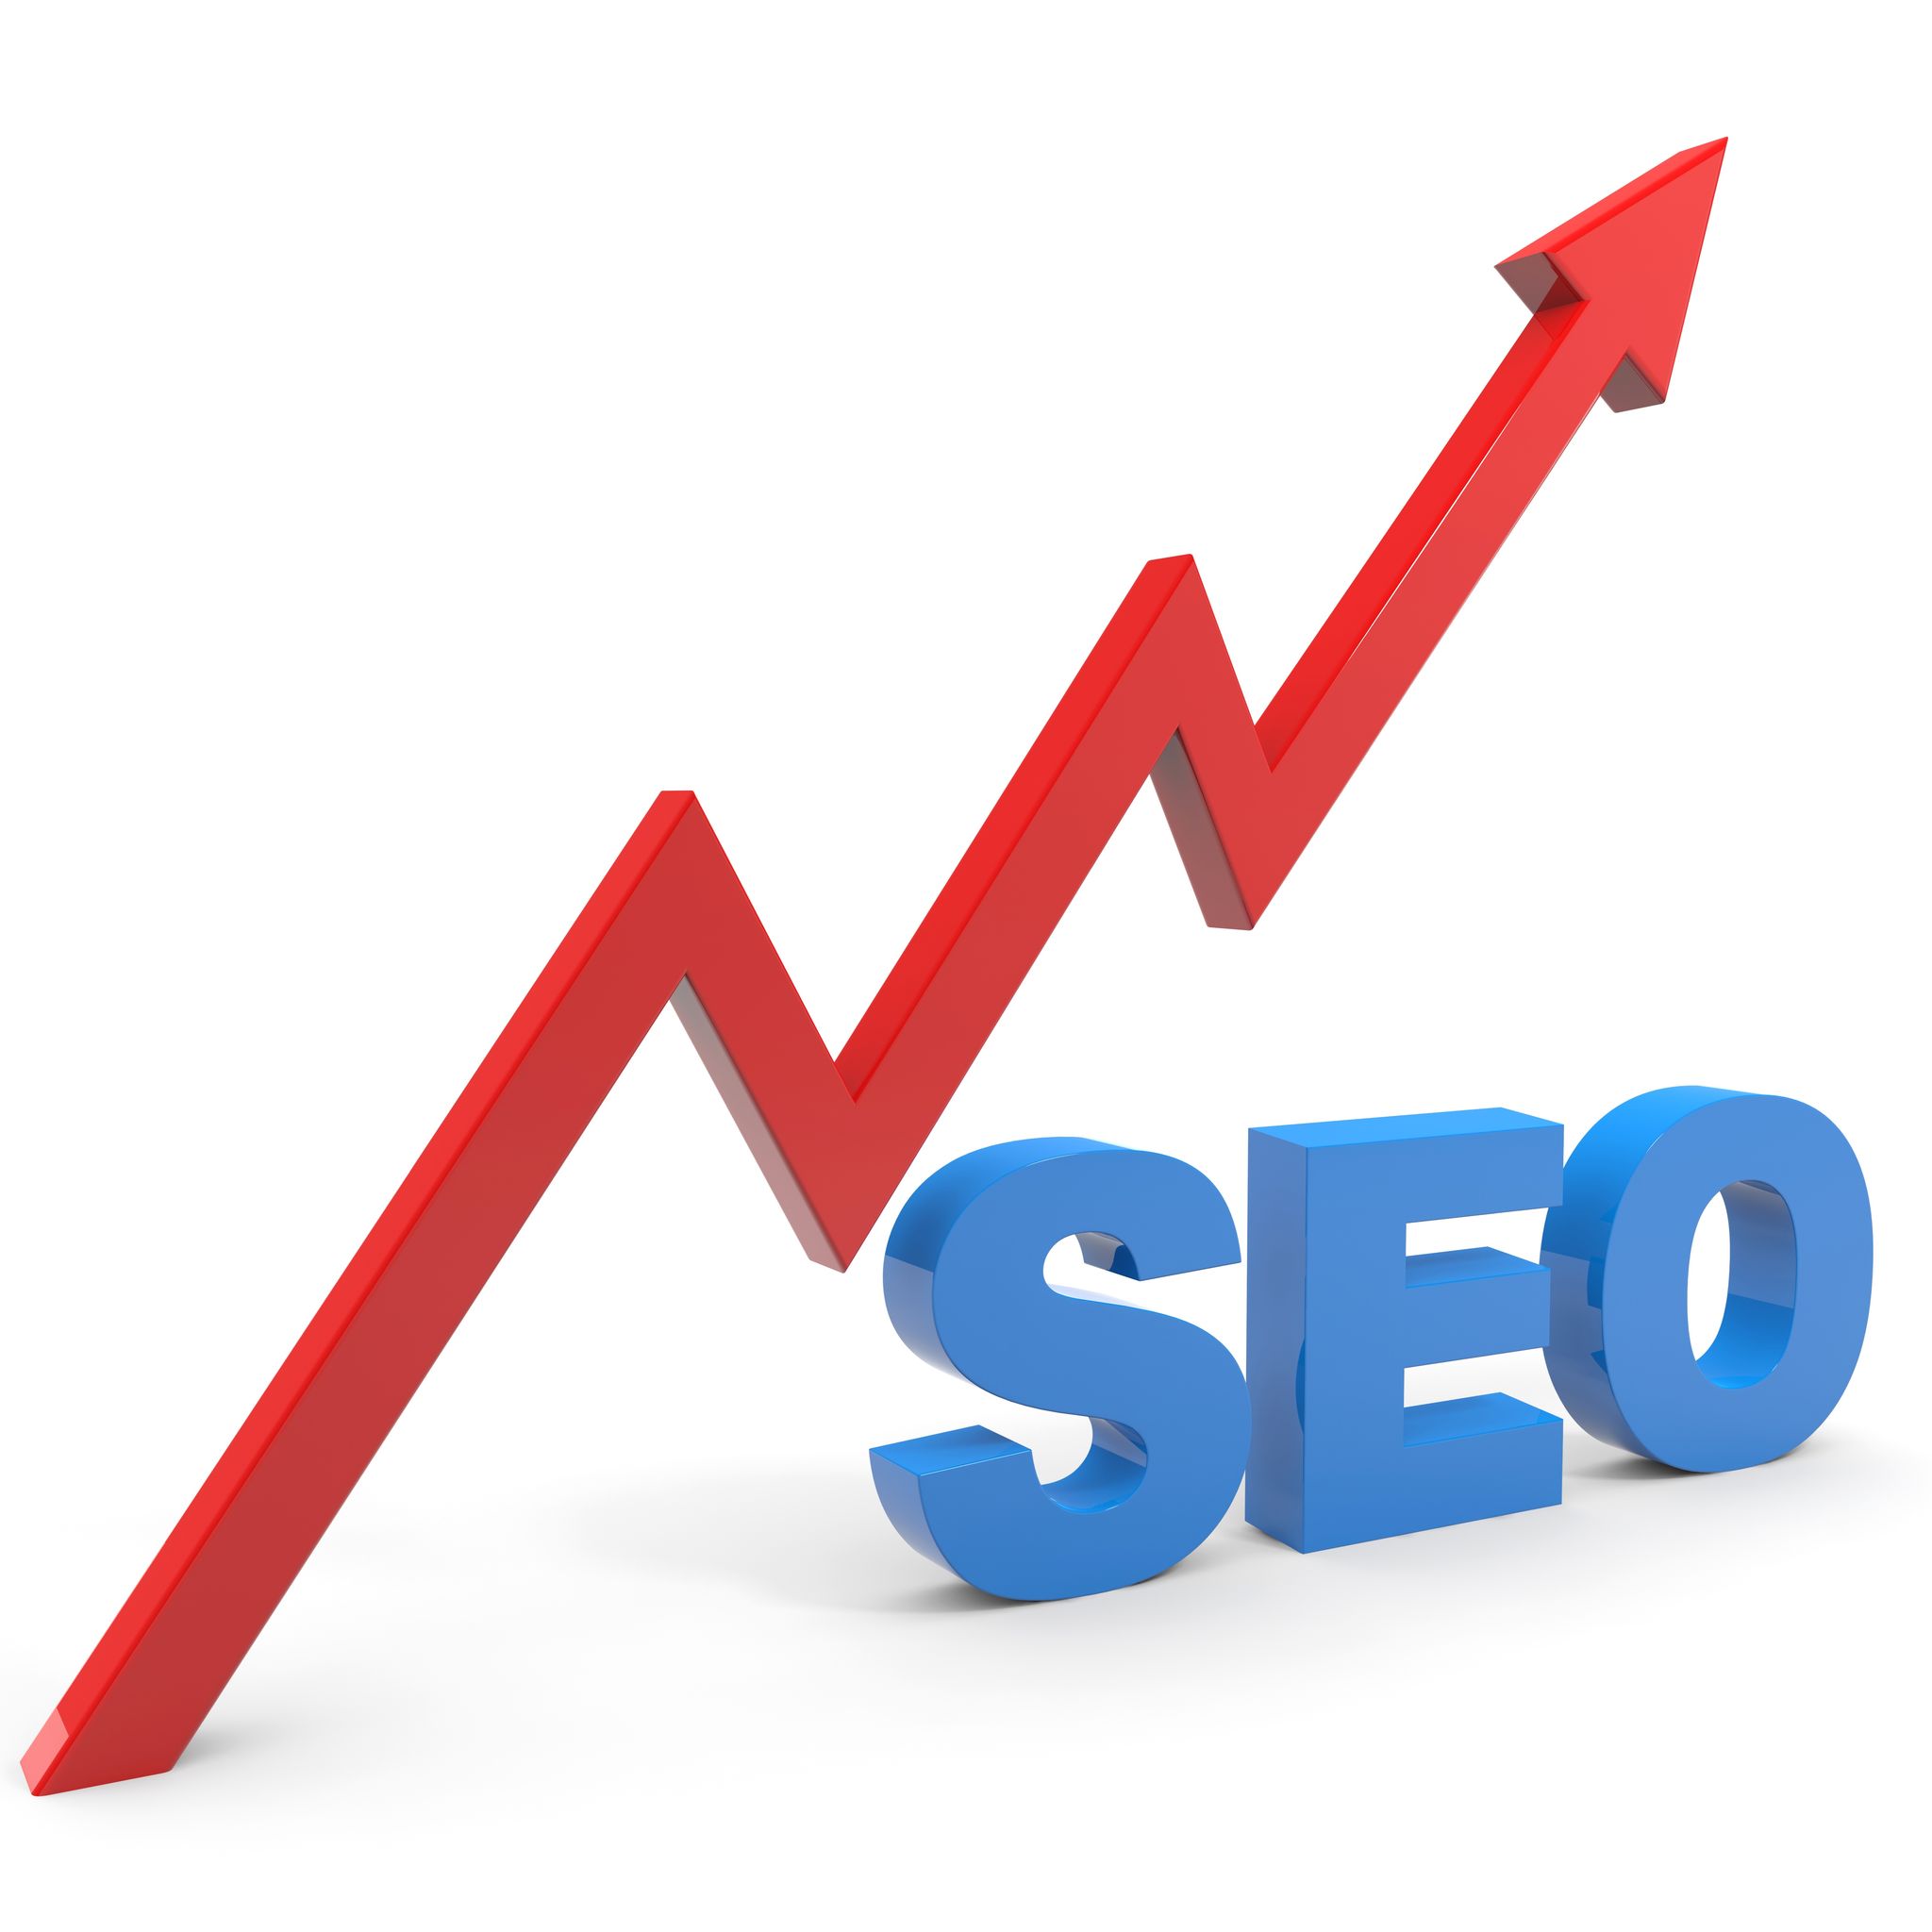 Hire a Local Business to Handle SEO Marketing in Baltimore